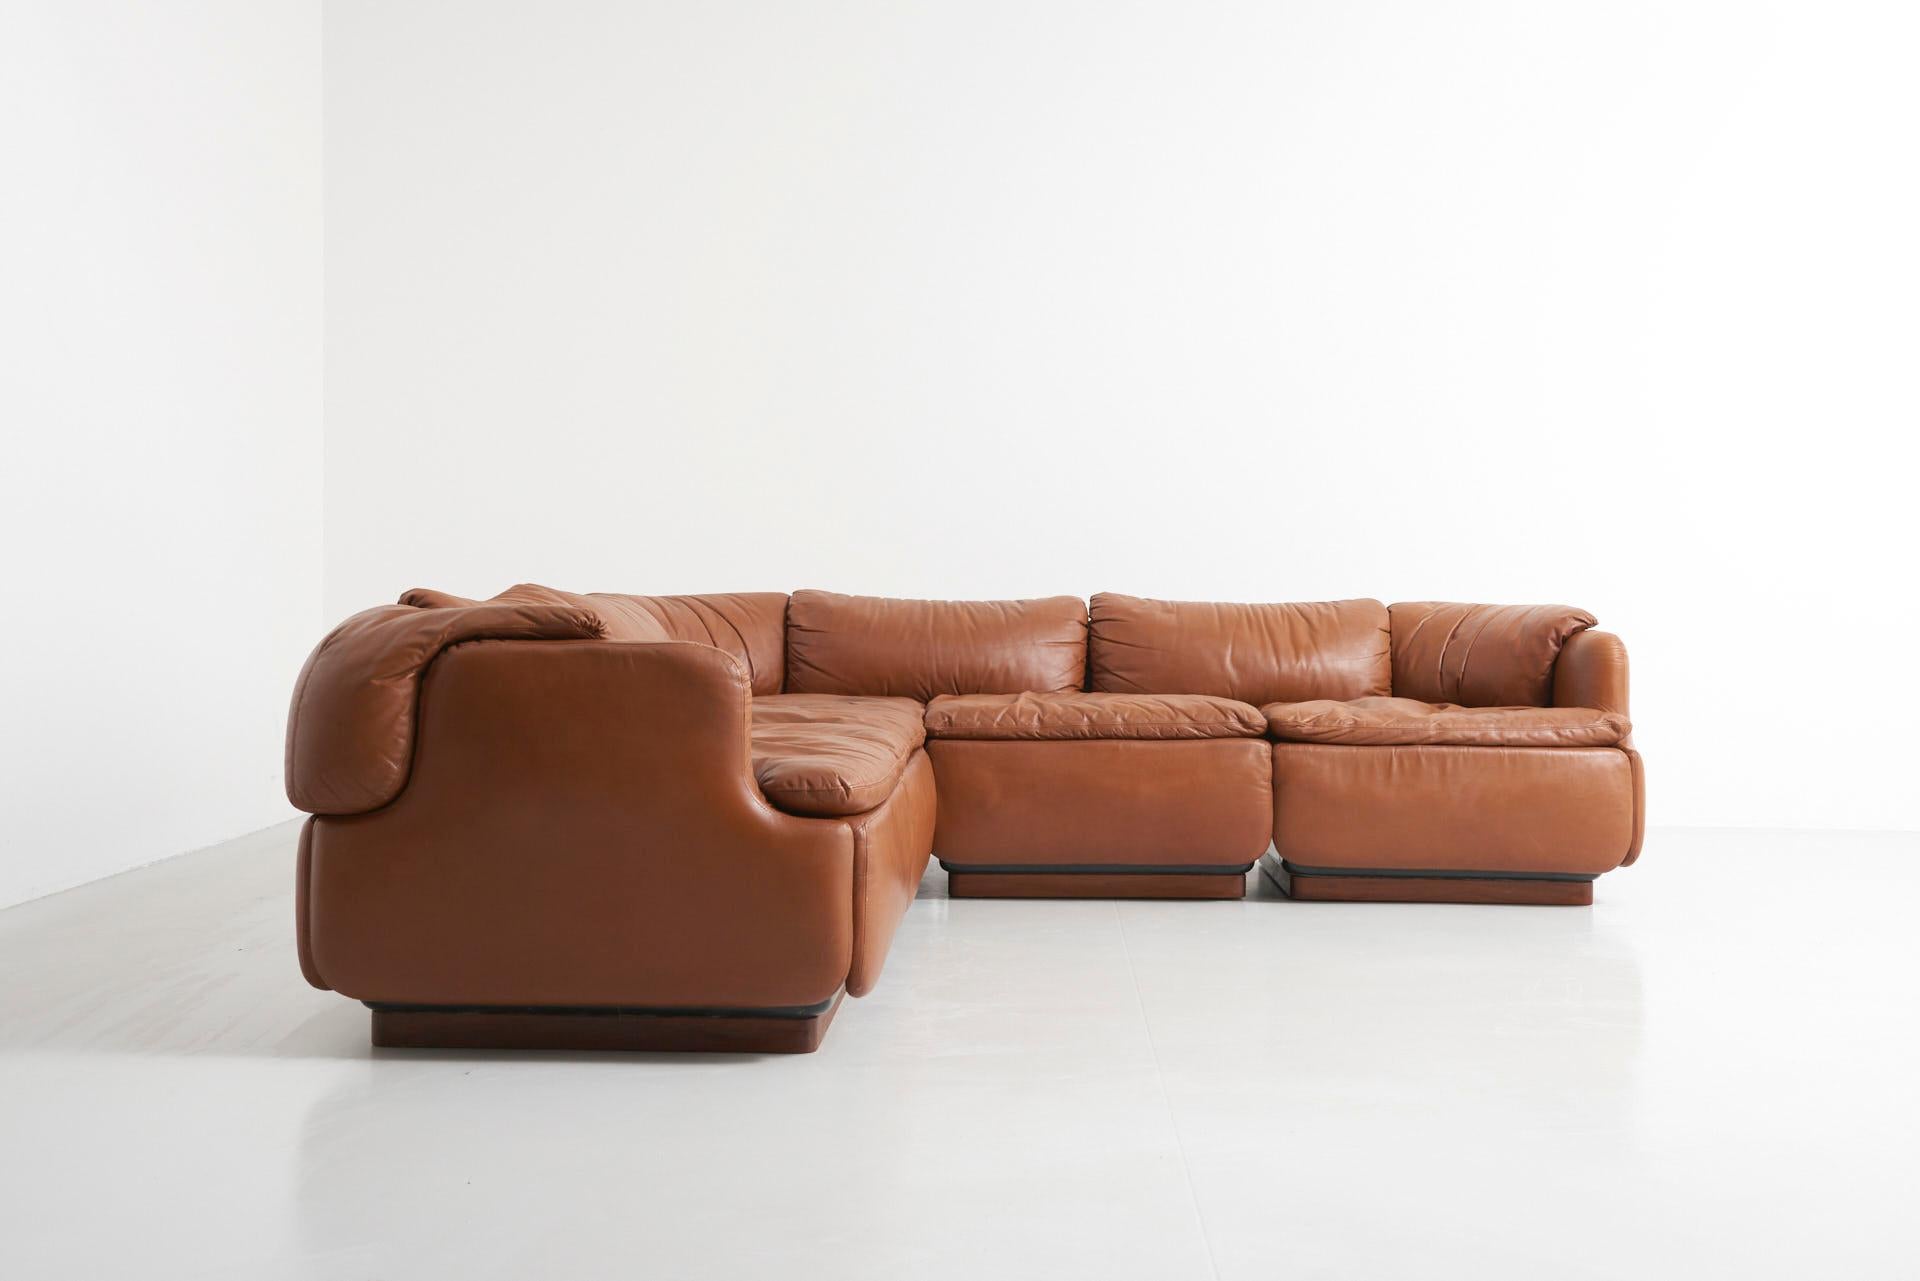 Corner sofa in natural leather from the Confidential Series, designed by Italian architect, Alberto Rosselli and manufactured by Saporiti in the 1970s. The sofa is one of the first modular seating systems for private use. It consist out of